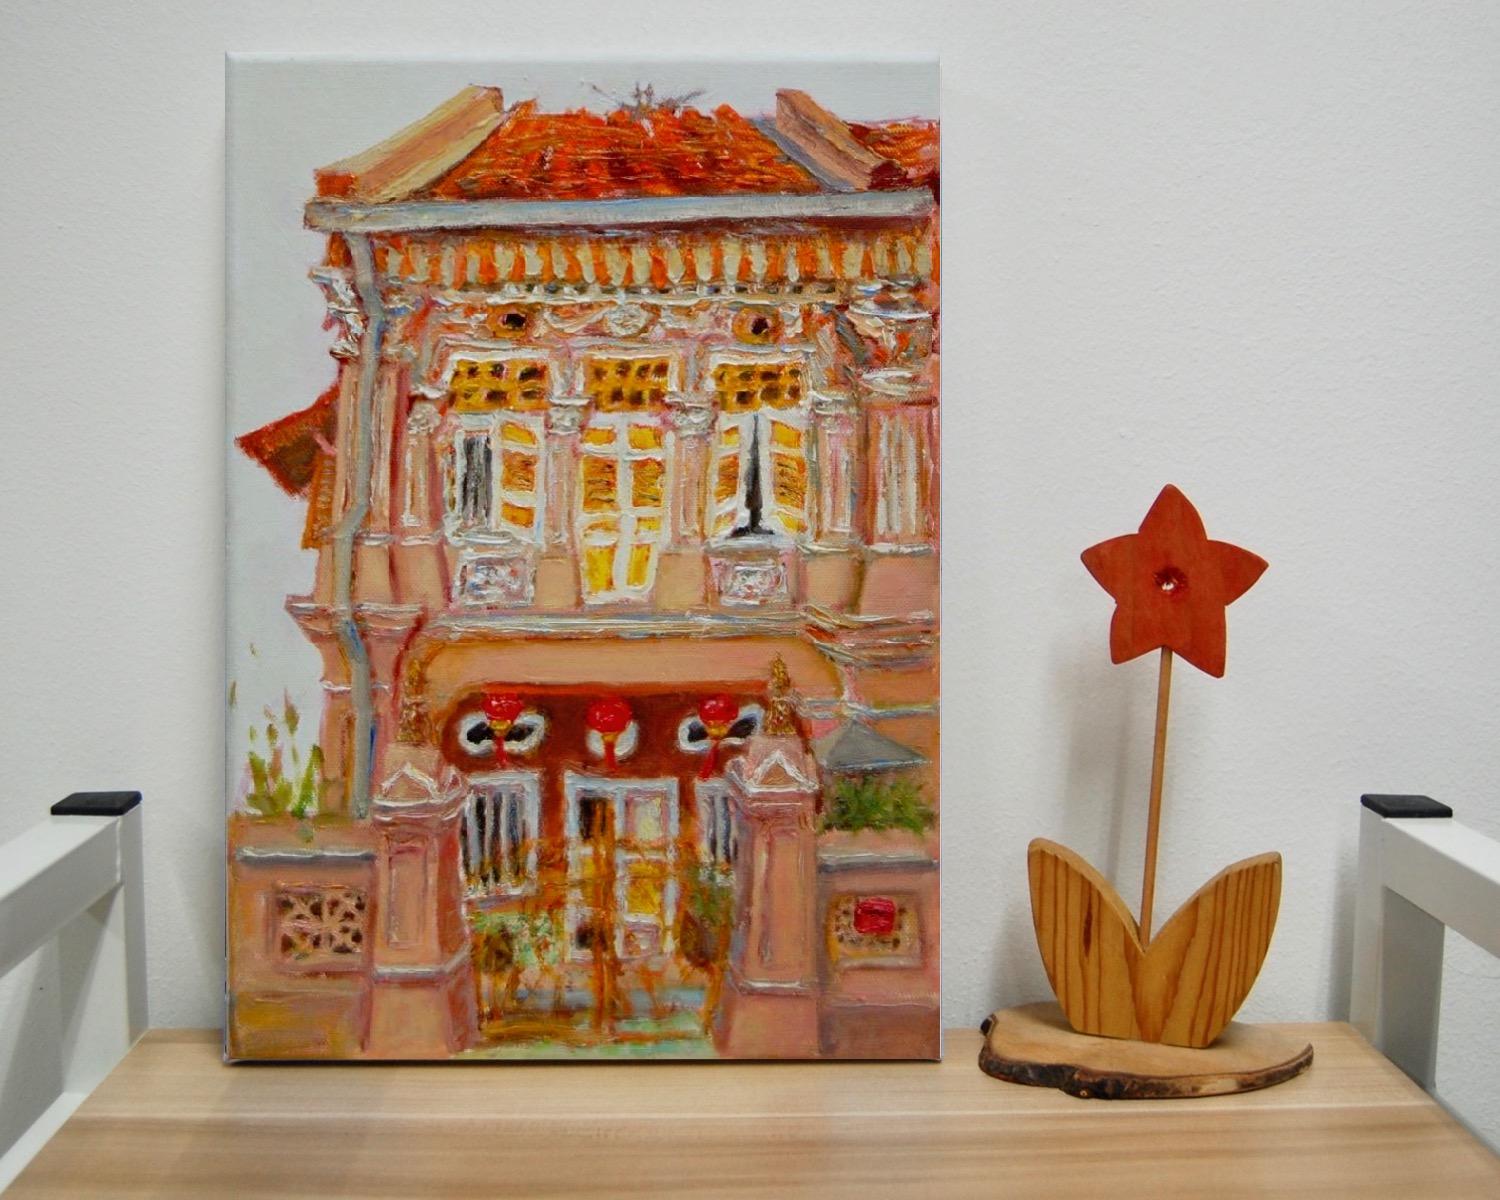 1 - Amber Peranakan Shophouse Oil Painting - Most Colorful and Picturesque Street in Singapore City - 8-Row Art Series - Singapore Gift -PH1